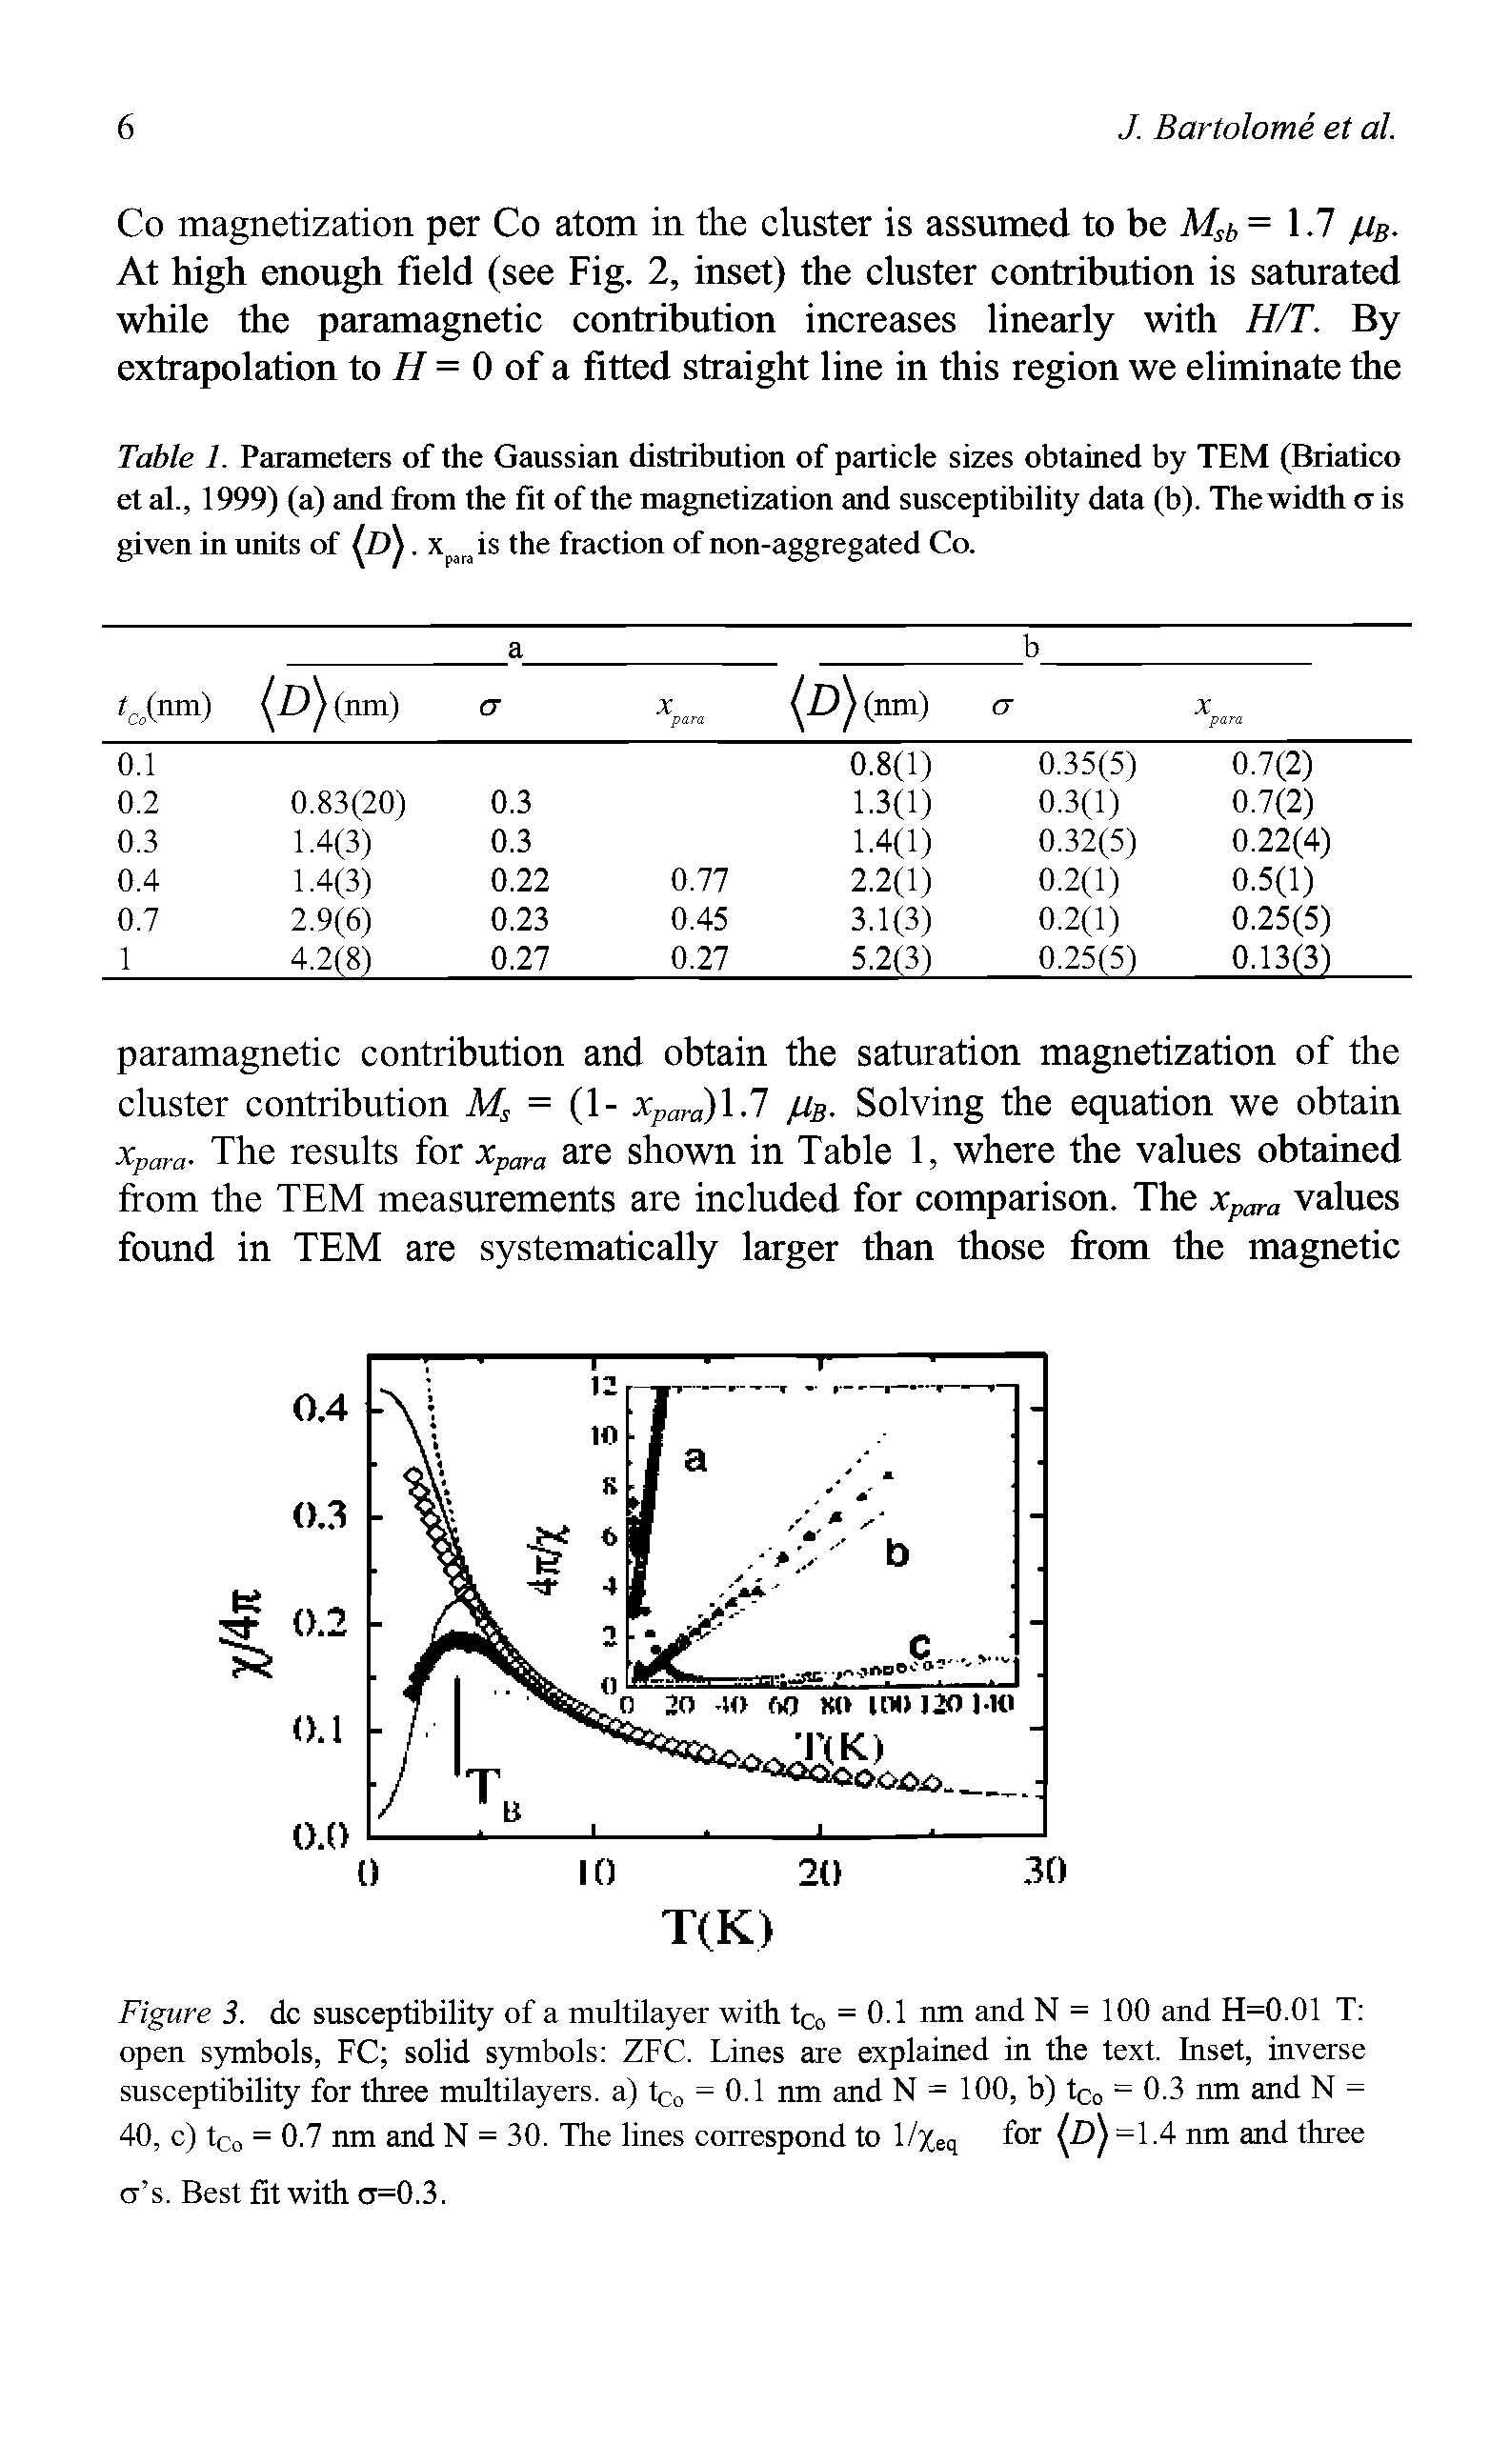 Table 1. Parameters of the Gaussian distribution of particle sizes obtained by TEM (Briatico et al., 1999) (a) and from the fit of the magnetization and susceptibility data (b). The width a is given in units of jl j. xpiriis the fraction of non-aggregated Co.